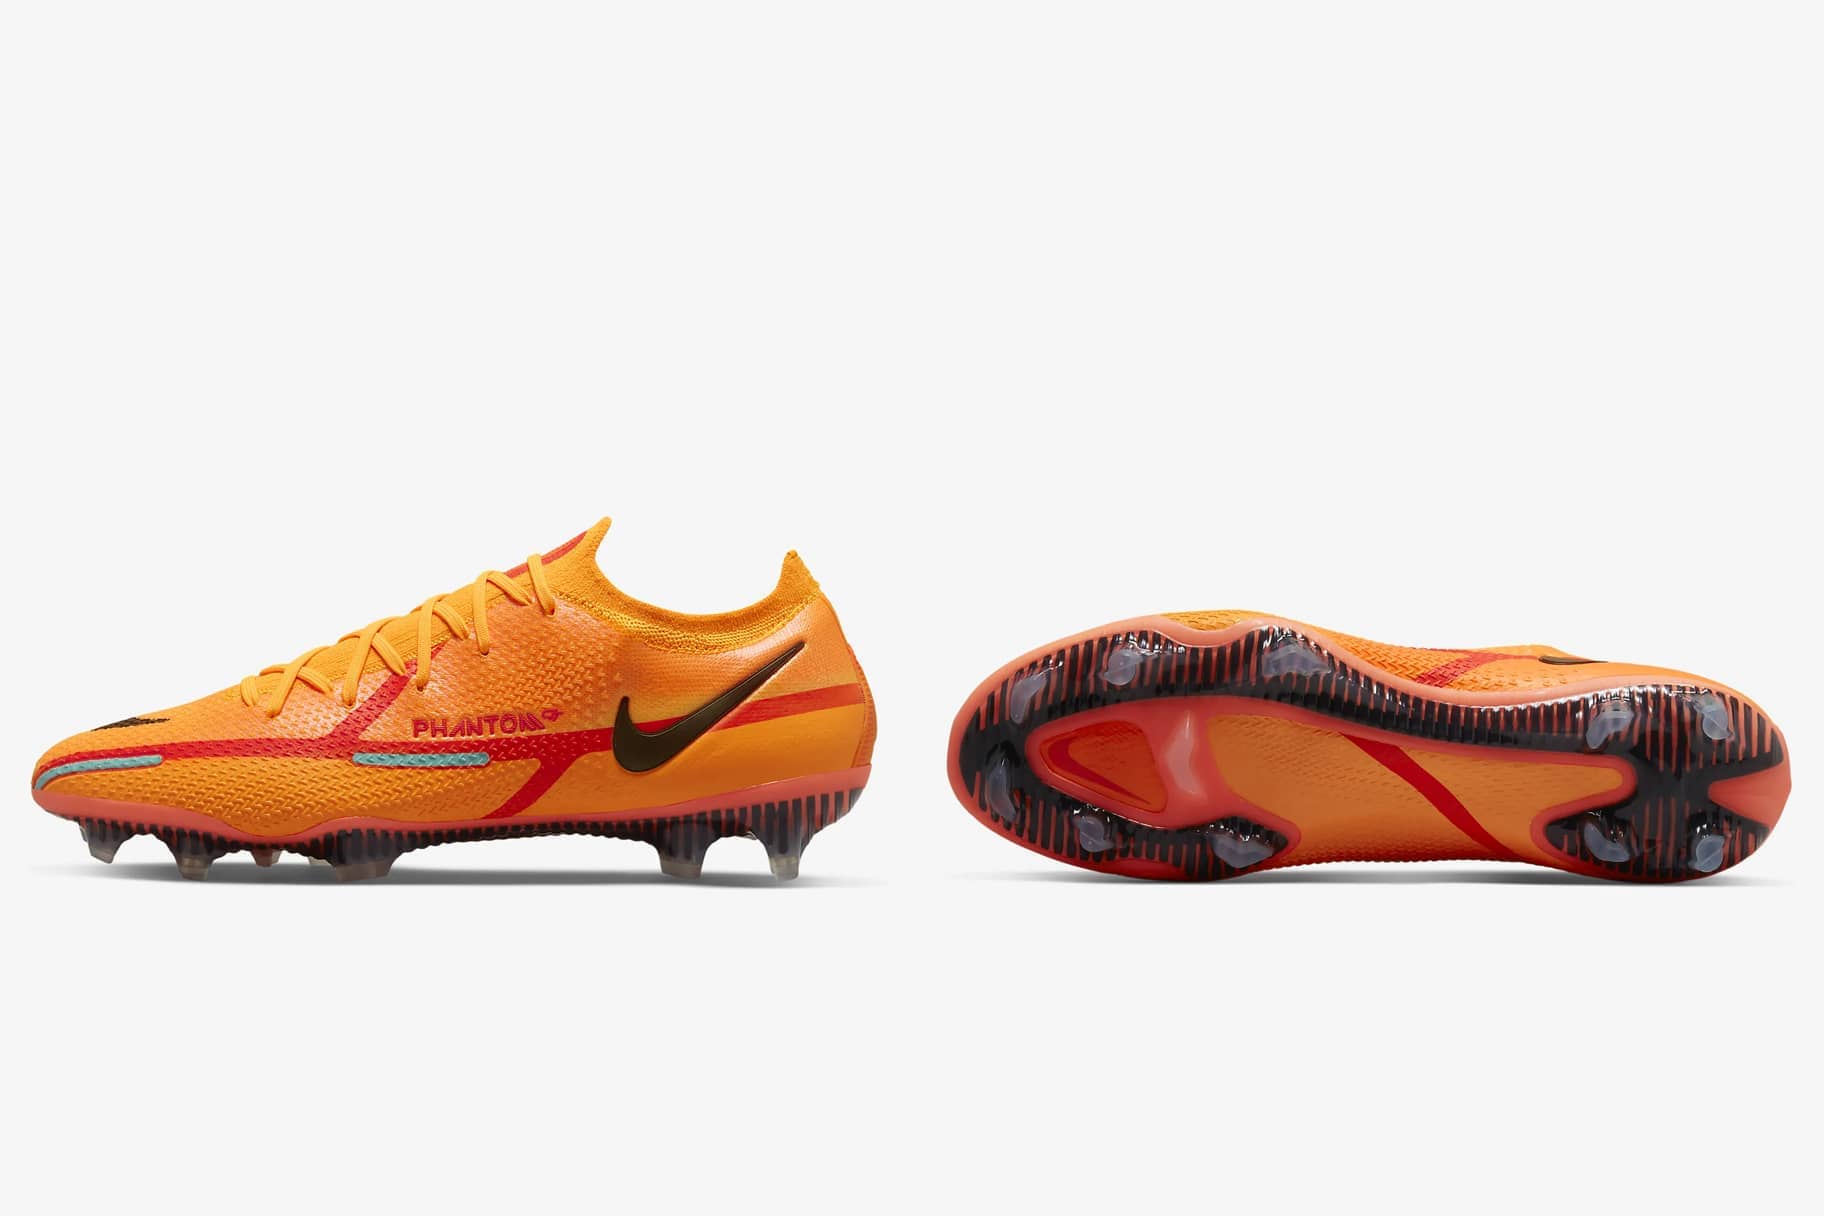 The Best Nike Football Boots. IE